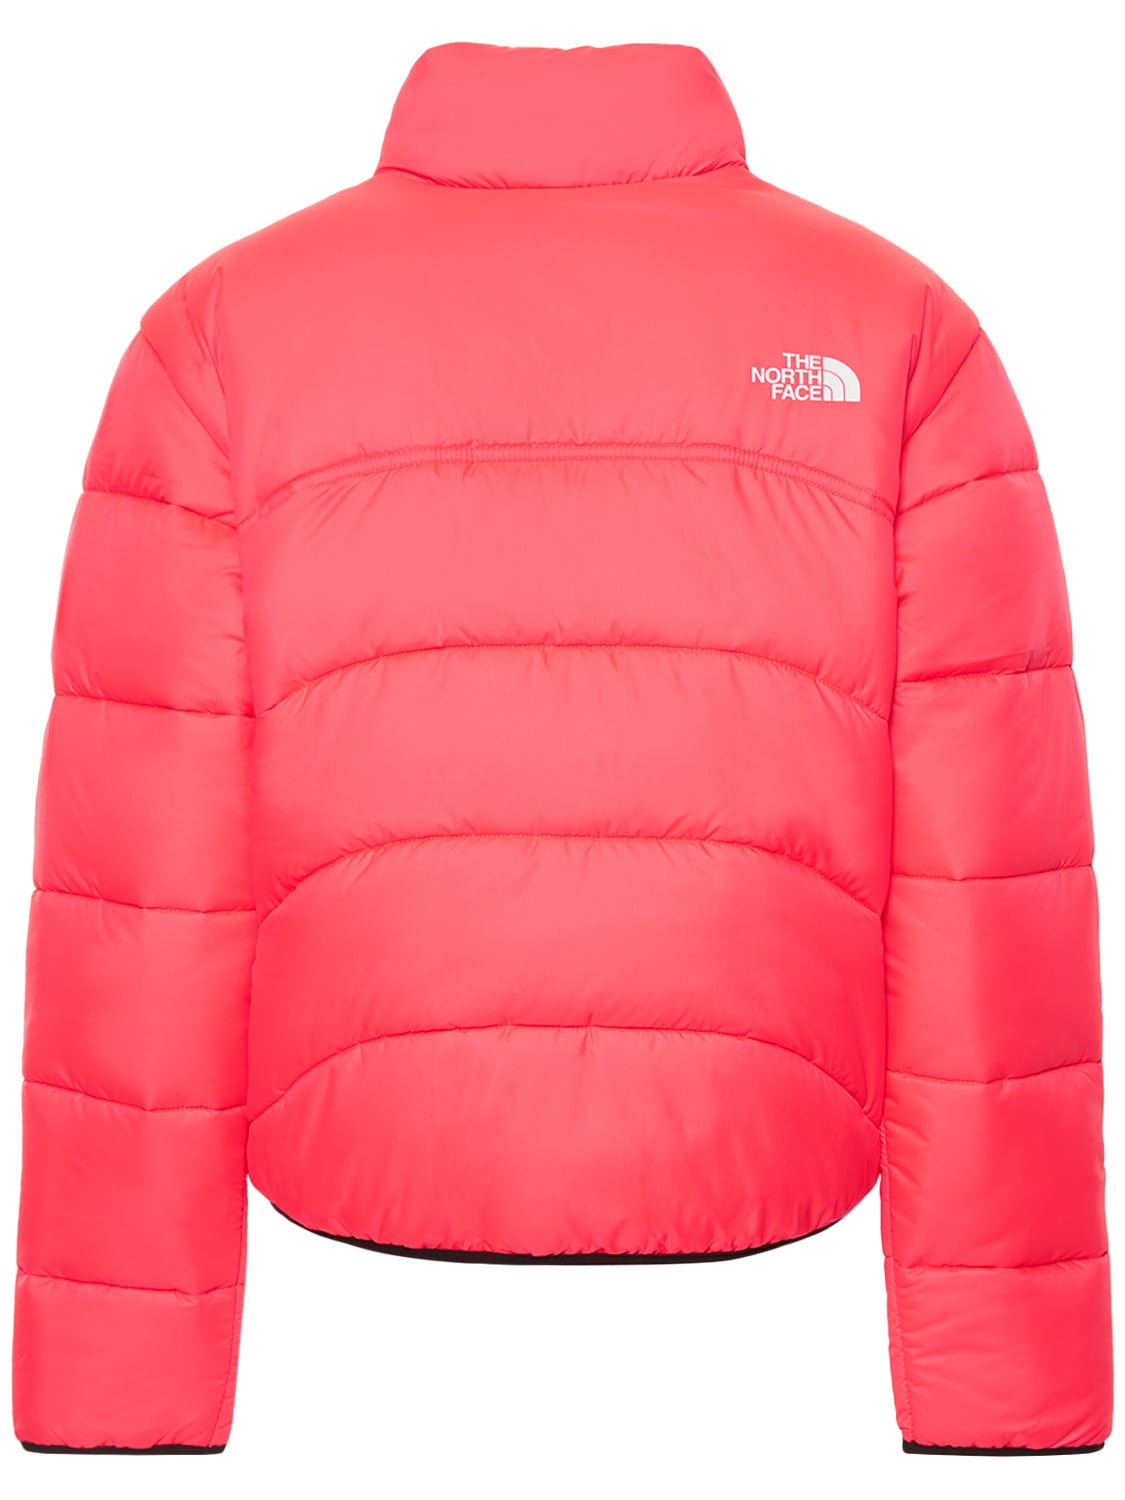 THE NORTH FACE ELEMENTS 2000蓬松夹克 